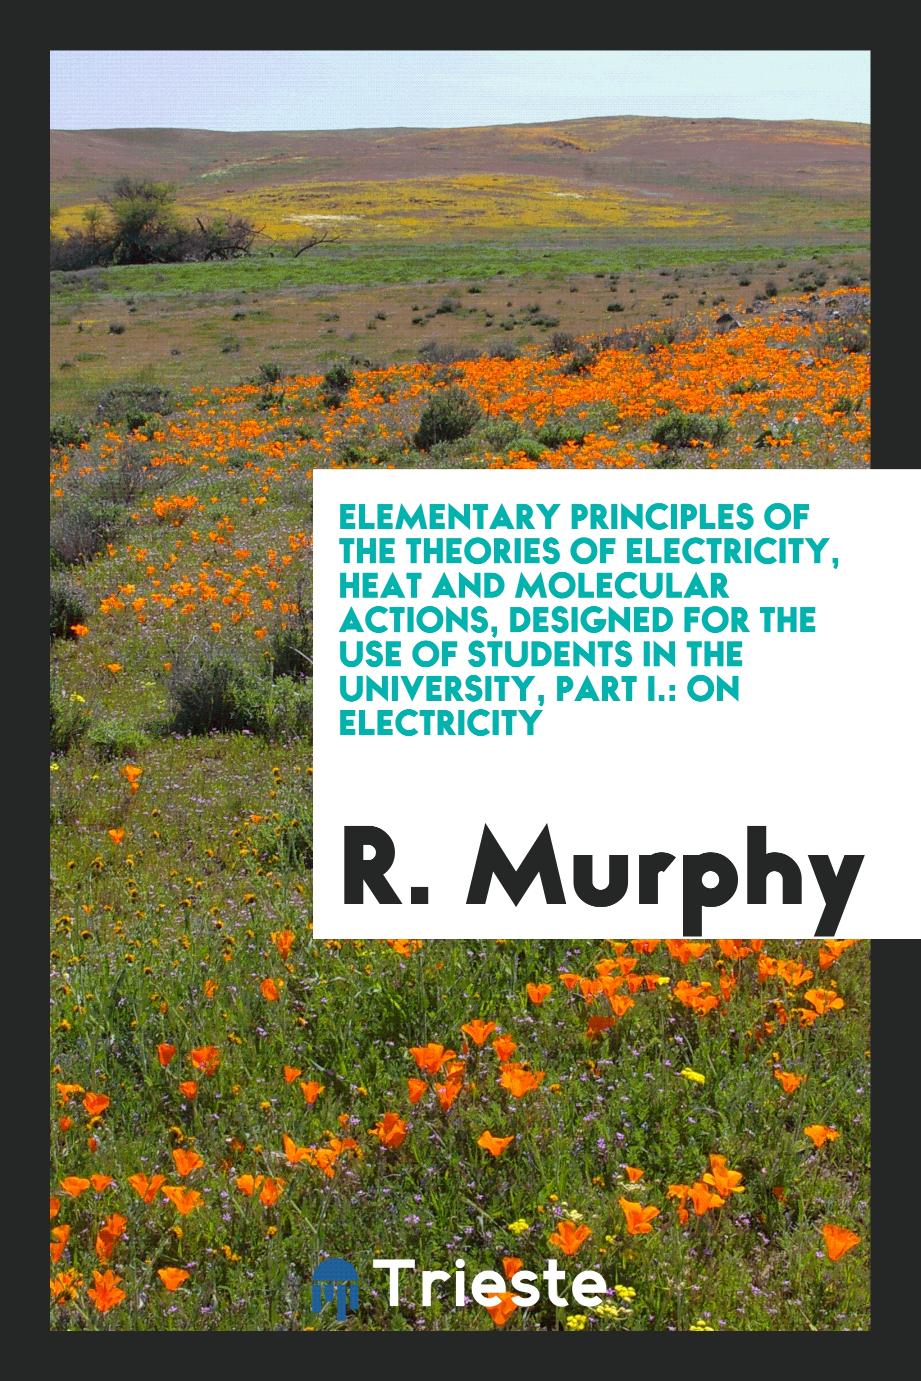 Elementary Principles of the Theories of Electricity, Heat and Molecular Actions, Designed for the Use of Students in the University, Part I.: On Electricity